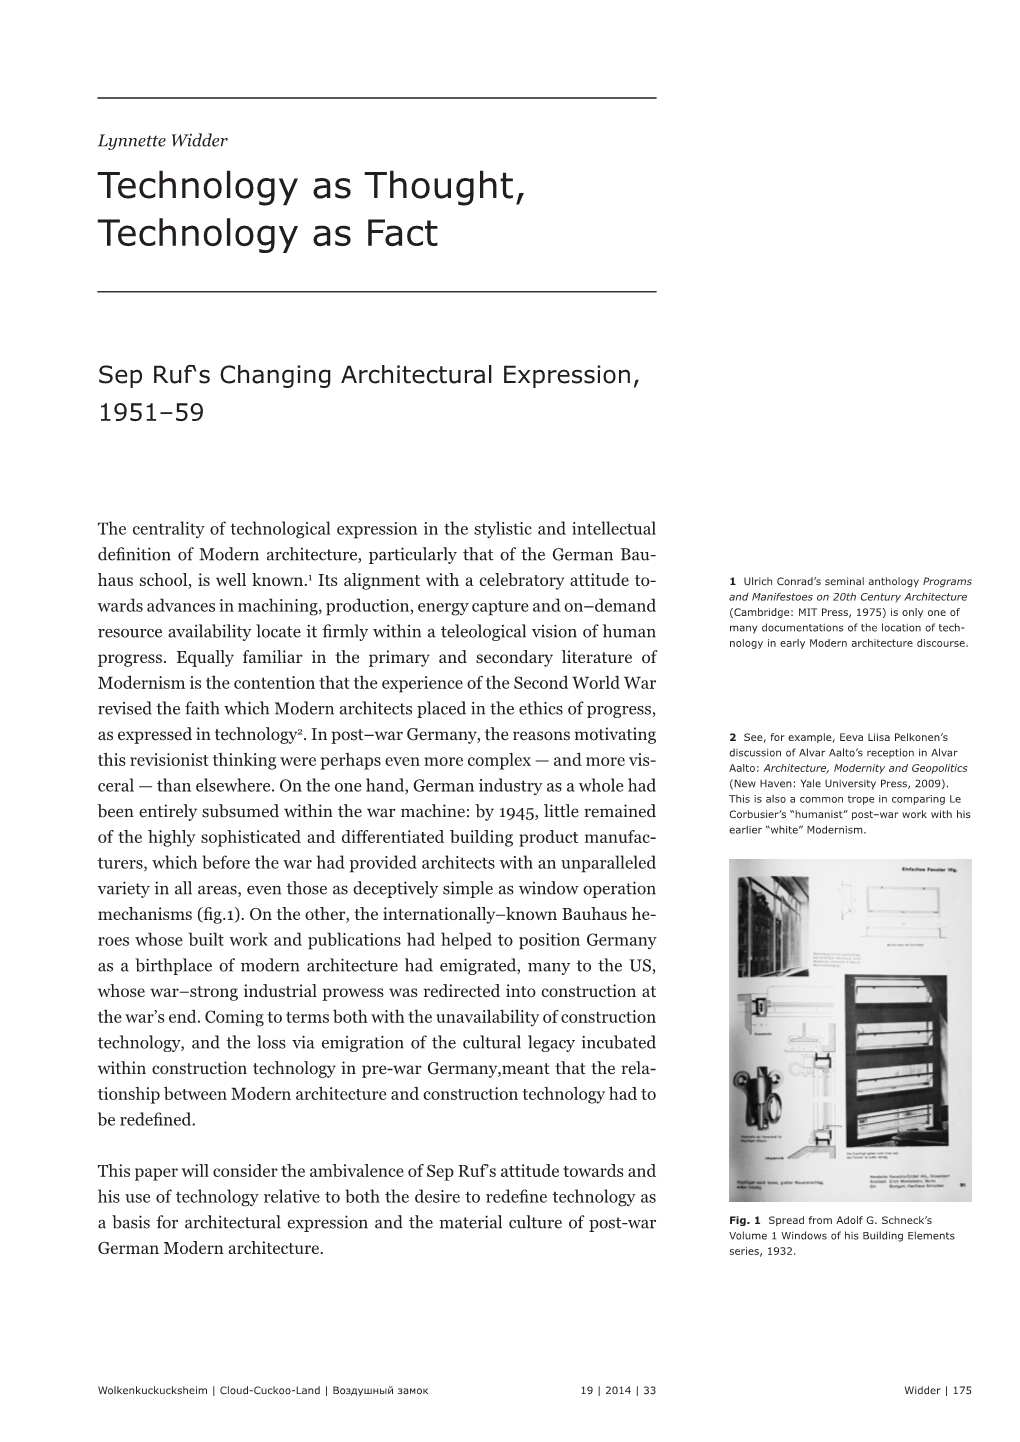 Technology As Thought, Technology As Fact